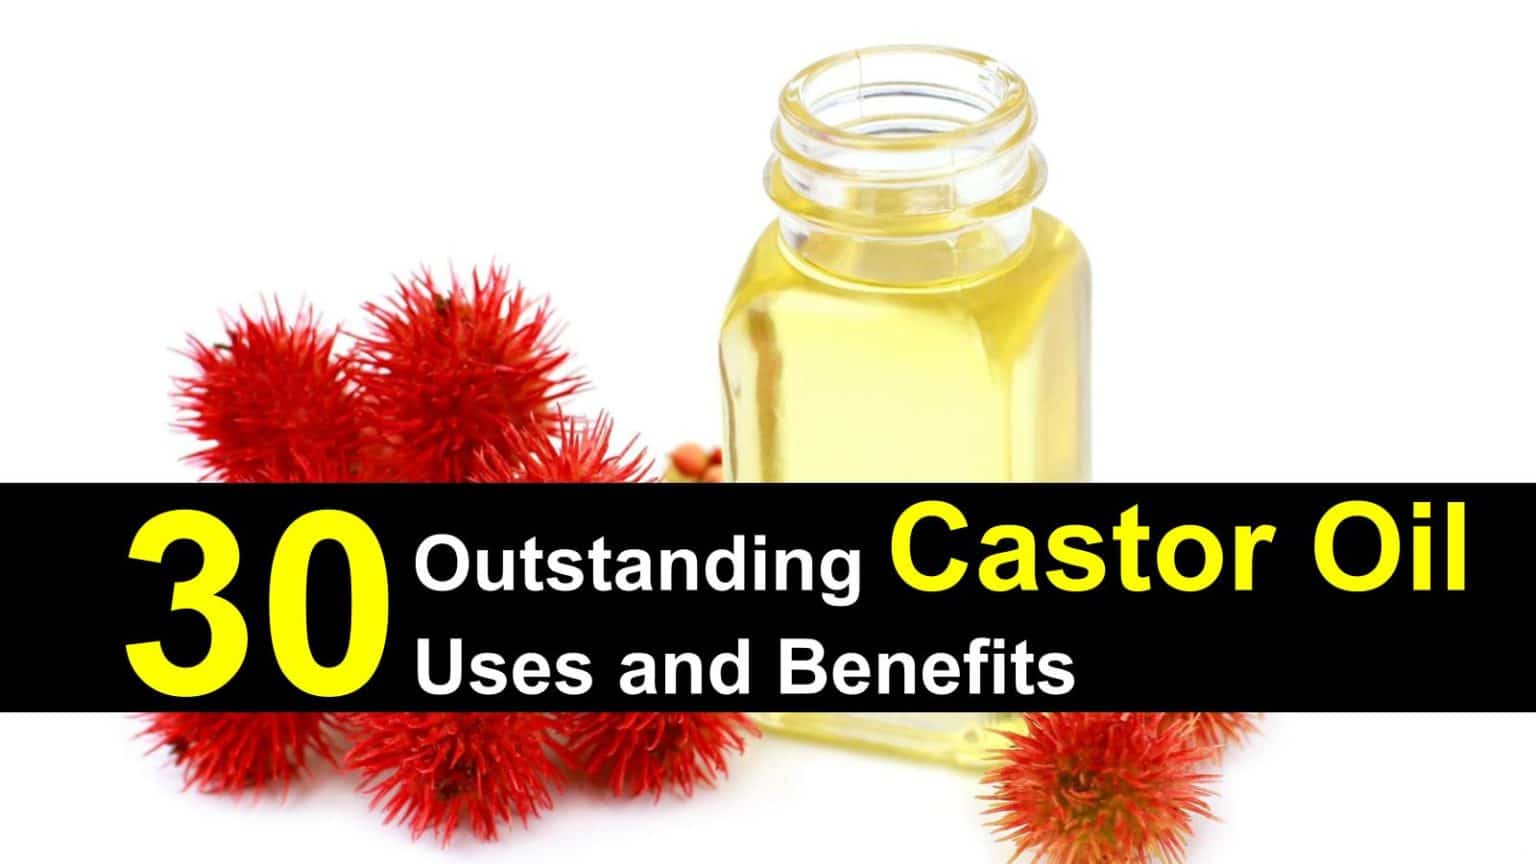 Castor Oil Uses And Benefits Titimg 1a 1536x864 